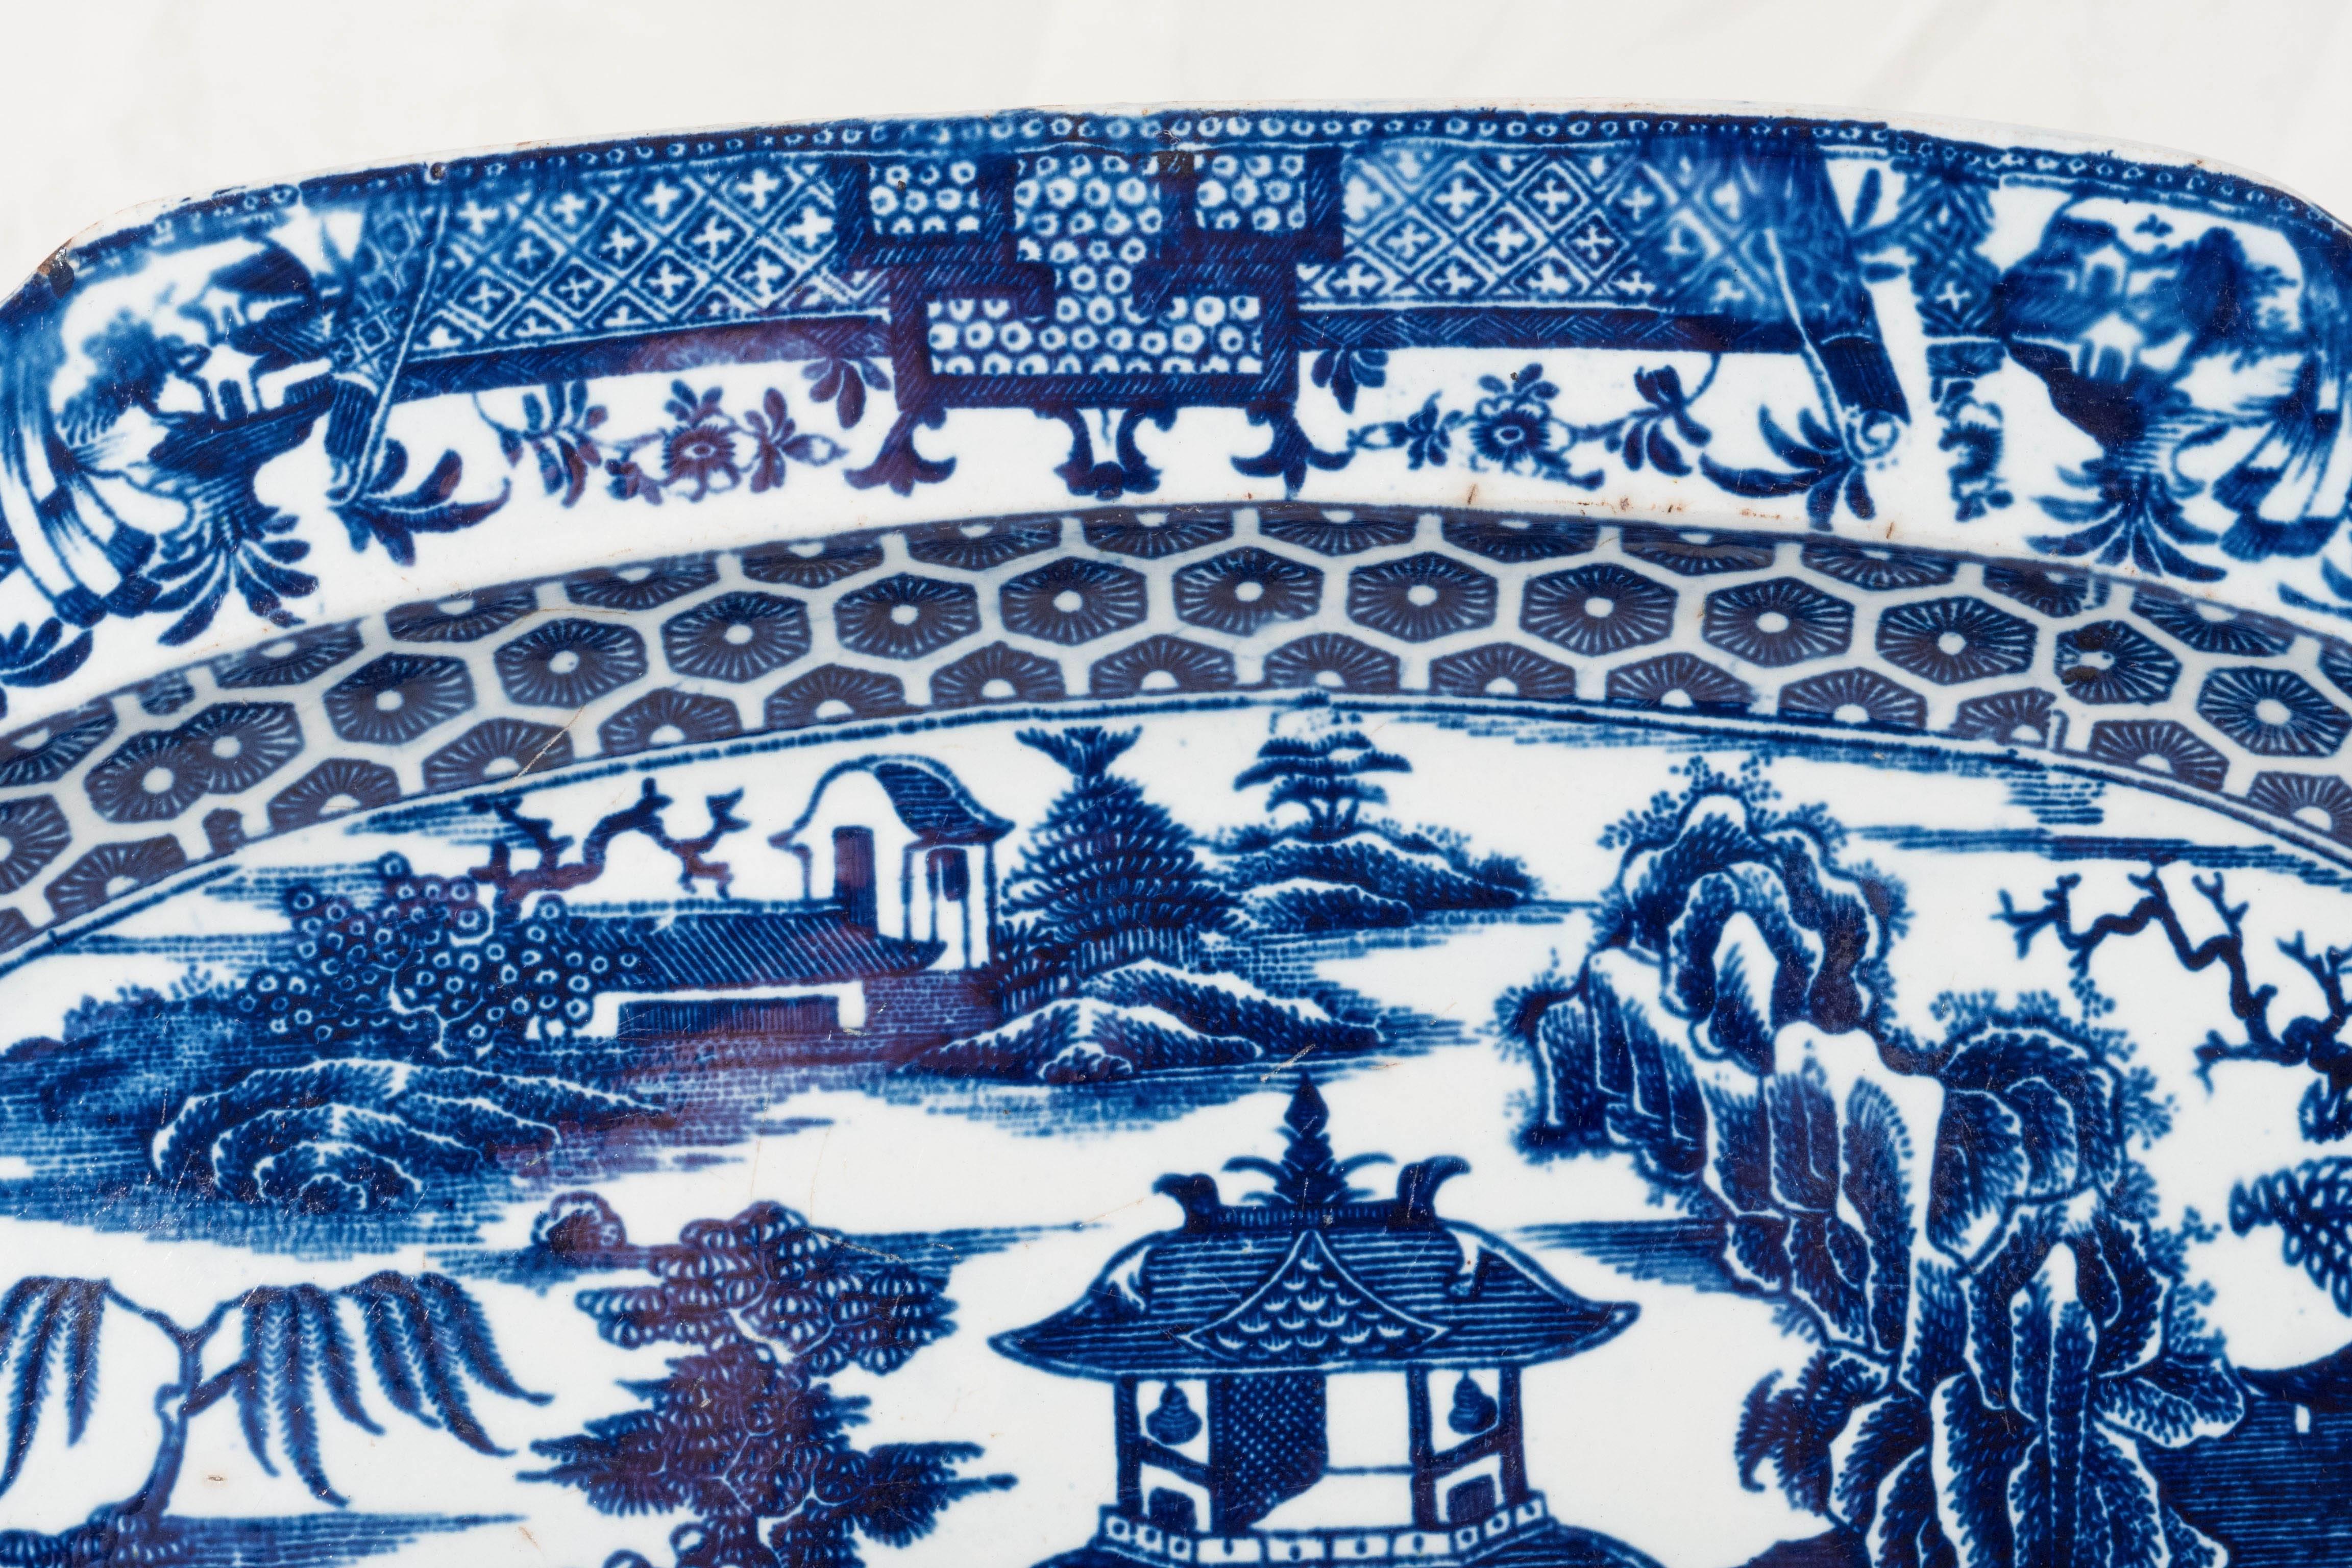 Late 18th Century English Blue and White Platter with the 